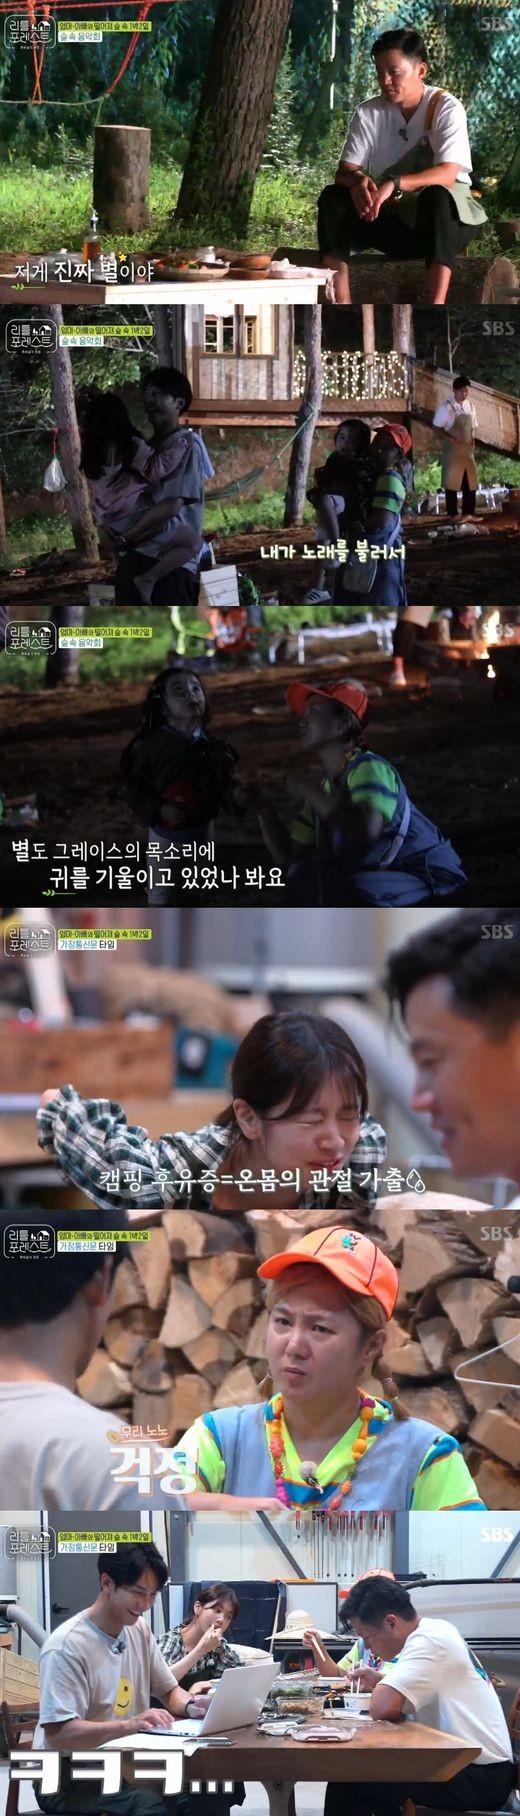 The petite of the Office workers, who felt themselves in the forest, struggled in the nursery.On SBS Little Forest, which aired on the 9th, Lee Seo-jin Lee Seung-gi Park Na-rae Jung So-mins child-rearing challenge was unveiled.Before the forest camping, Lee Seo-jin struggled to set fire, but rarely made fire, so he had to sweat.Lee Seo-jin laughed when he added the innocent point of Lee Han-gun, I do not get a fire.Lee Han-gun led his younger brothers to pick up pine cones.When children showed interest in camping tents, Lee Seung-gi felt a sense of disenchantment.I made a tree house in three weeks, and the children prefer tents that take 30 minutes.Lee Seung-gi then shouted at the children, I am going to come to my house, but no one replied.At night, the camp began, and the children showed self-reliance by taking their own chairs. The problem was that the chairs were not fixed and the children fell down.Lee Seo-jin had to repair the chair again with bead sweat.In the meantime, Lee Seung-gi baked a barbecue for the children.Lee Han-gun, who watched the scene closely, pointed out that it does not ripen if you put meat overboard. Lee Seung-gi laughed.Lee Seung-gi felt more happiness in the childrens storm food room than Lee Han-guns grilled meat.Lee Seo-jin packed the fruit in Brooke, who had not eaten properly. Lee Seo-jin said, I still do not know the taste of children.I think children are more difficult, as adults do, he said.Grace was the first Camping. So when Park Na-rae asked about Camping, Grace silently avoided her seat.Looking at the embarrassed Park Na-rae, Lee Seo-jin and Lee Seung-gi also laughed. Especially Lee Seung-gi said, It is different from the camping we thought.I wanted the sound of nature that left the city to touch the childrens heart. Lee Seung-gis preparation is the time to listen to the sound of nature.Grace confessed innocently that she heard a snake, and laughed loudly, while most of the children were excited to hear a grassworm.After Camping, the children all fell asleep, and the performers breathed away, saying, Why is the day so long today? I think my back is out.I also enjoyed the late evening with the lunch box prepared by the production team. When Jung So-min expressed his impression, Lee Seo-jin grumbled, What is this impression?Jung So-min laughed, saying, It is the first time to take care of our rice.But late at night, child care is endless, and Lee Seung-gi said, Its like a real job. I eat rice while I work late.